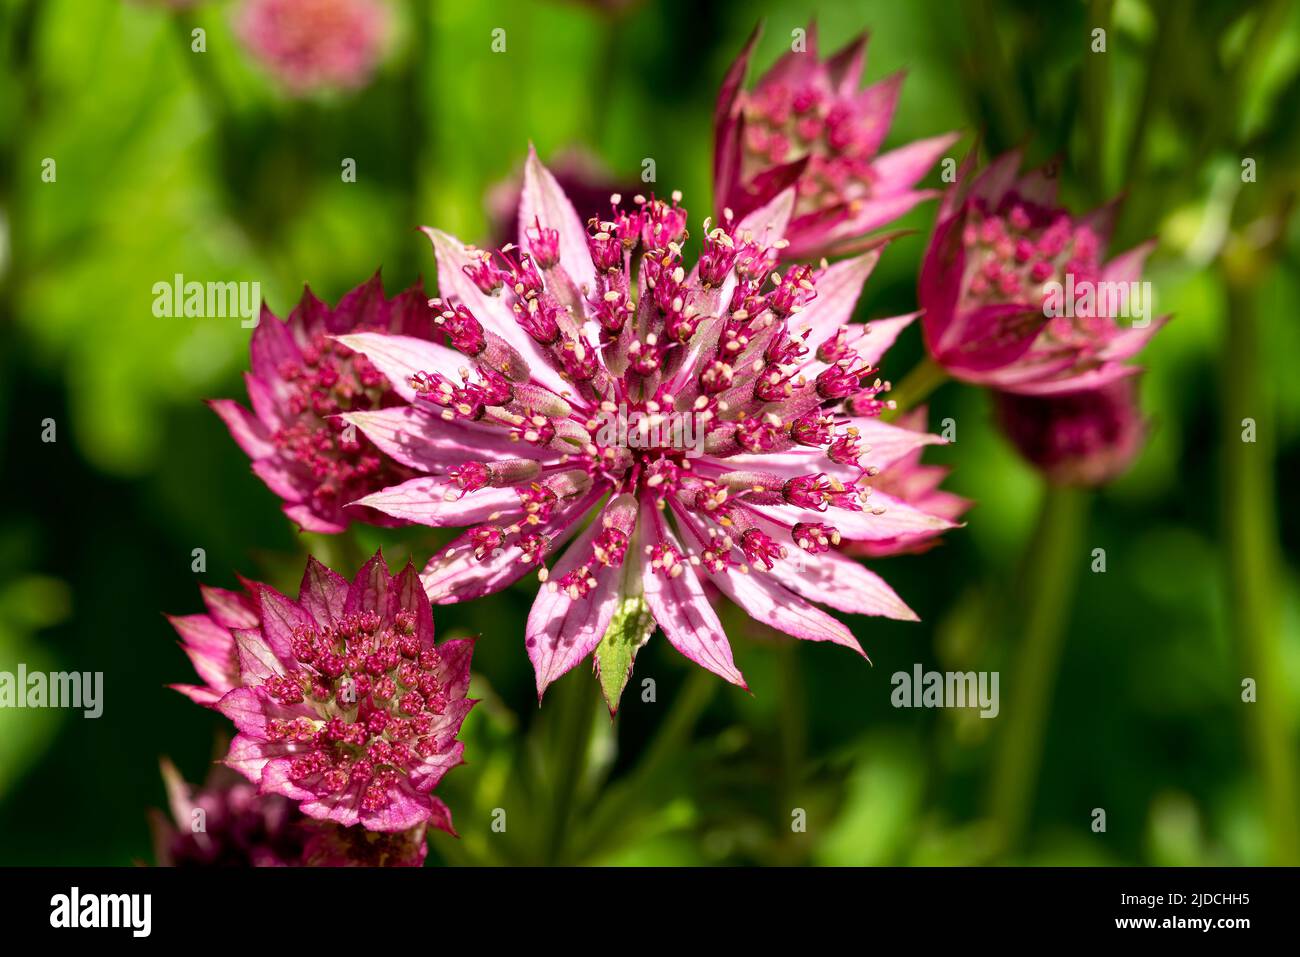 Astrantia major 'Roma'  a summer autumn fall flowering plant with a pink red summertime flower commonly known as great black masterwort, stock photo i Stock Photo